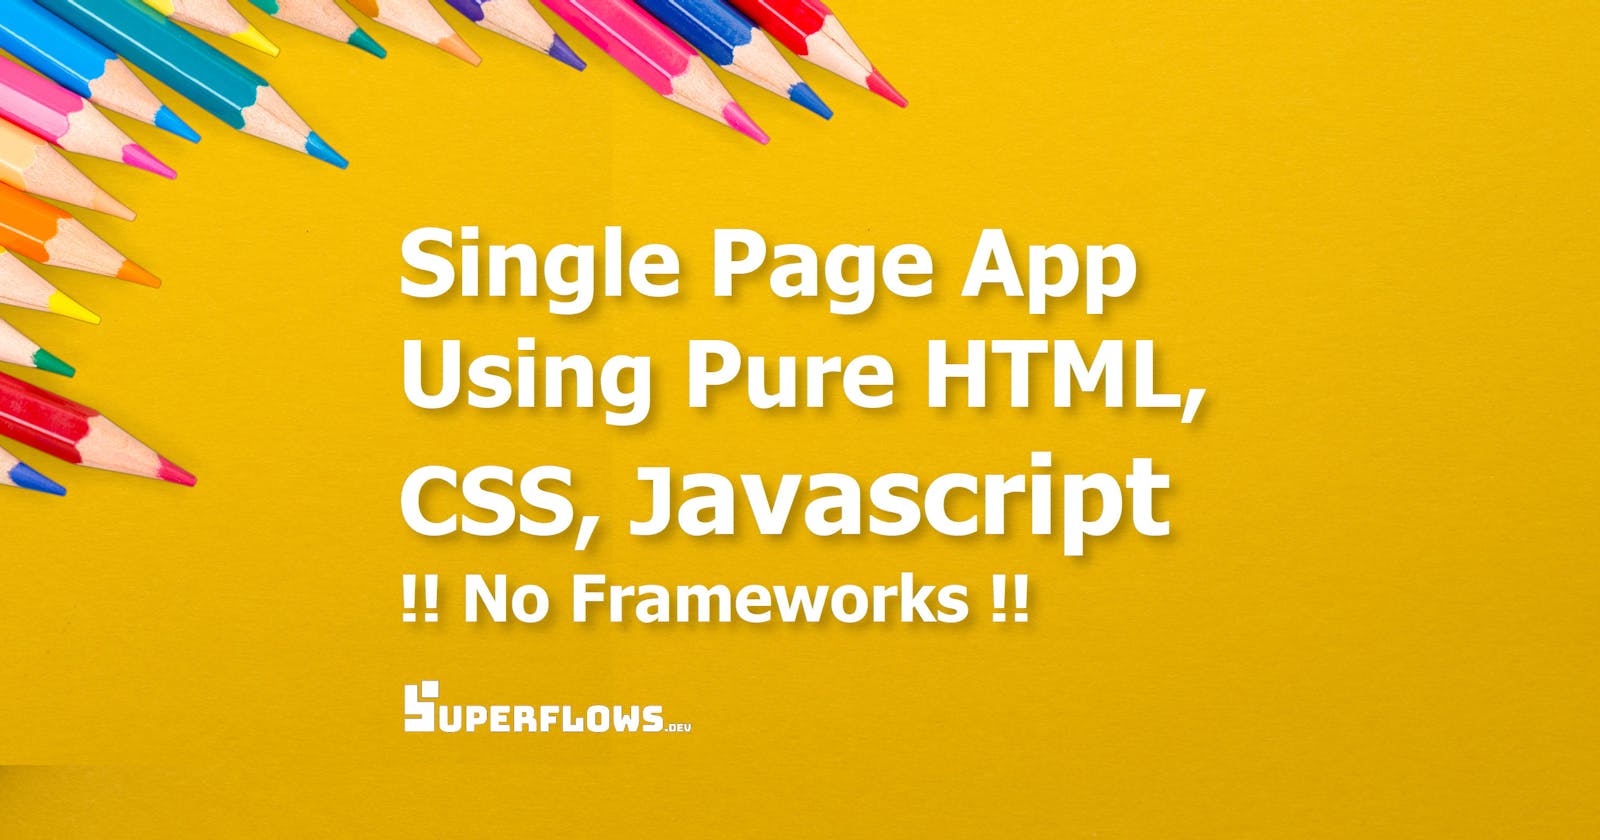 How To Implement A Single Page Modular App Architecture Using Pure HTML, CSS, Javascript